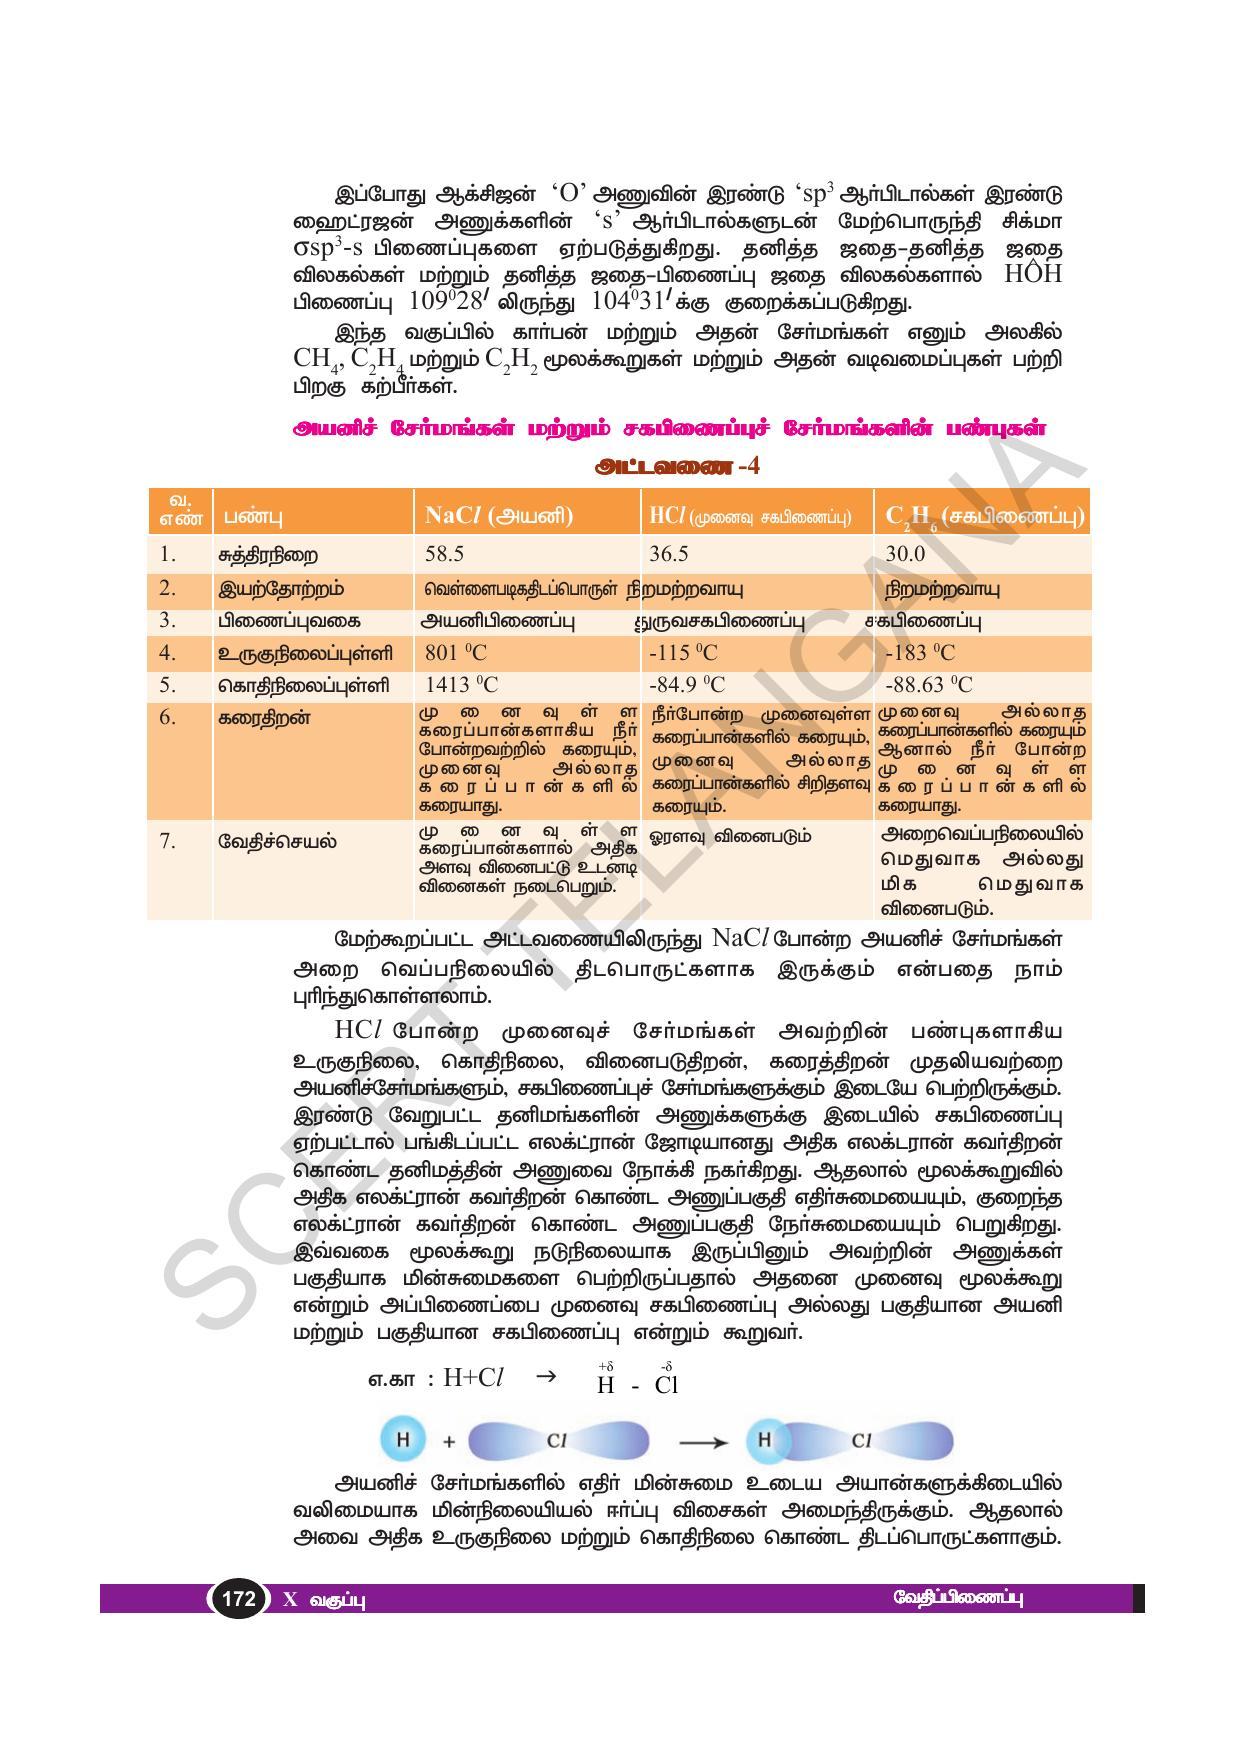 TS SCERT Class 10 Physical Science(Tamil Medium) Text Book - Page 184